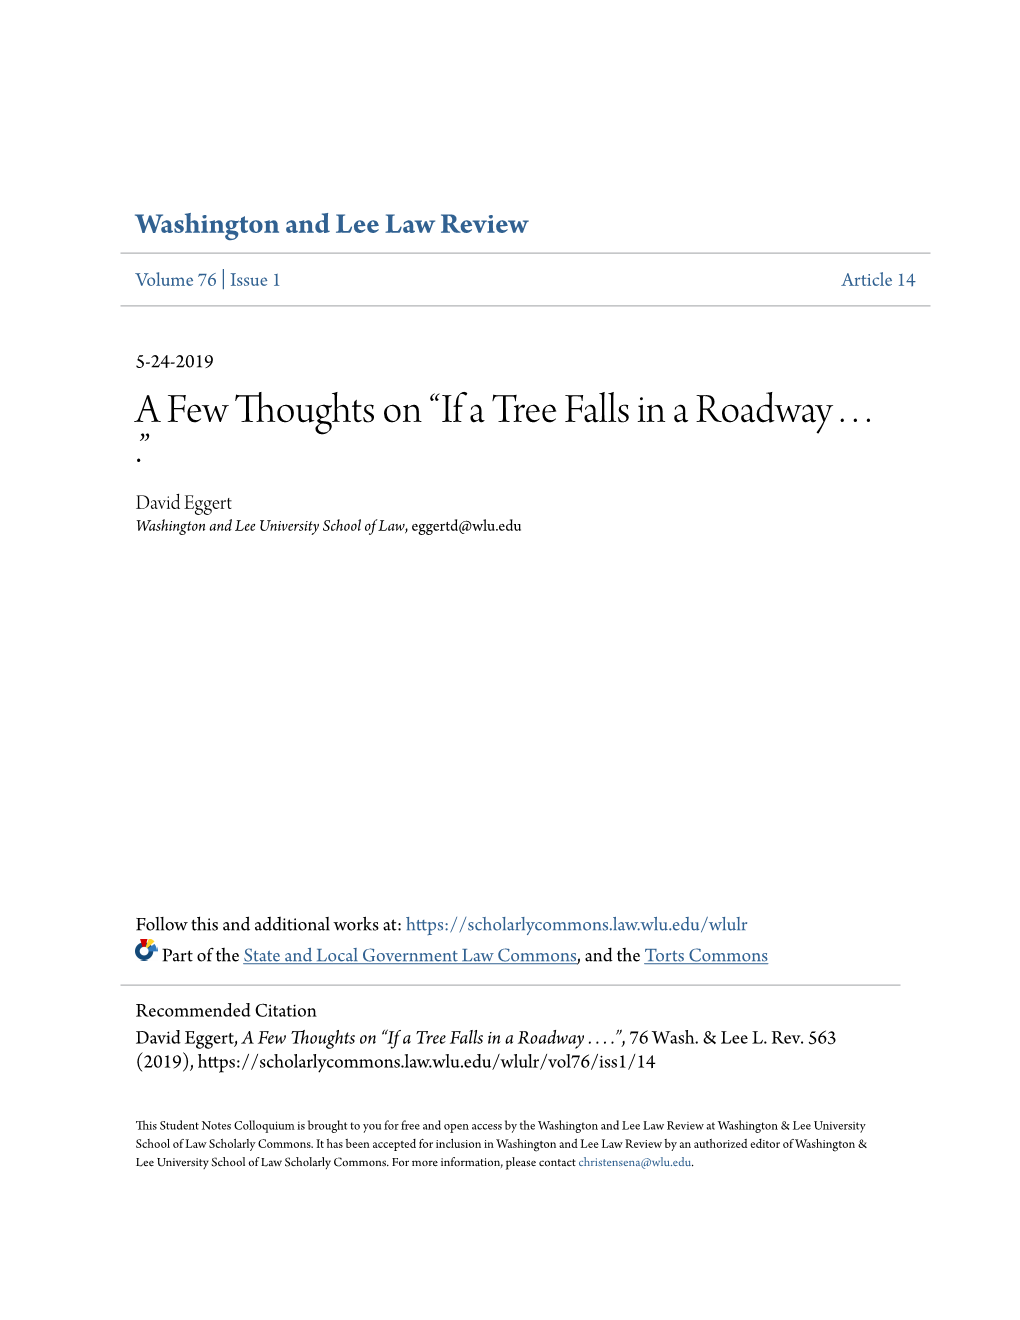 A Few Thoughts on “If a Tree Falls in a Roadway ...”